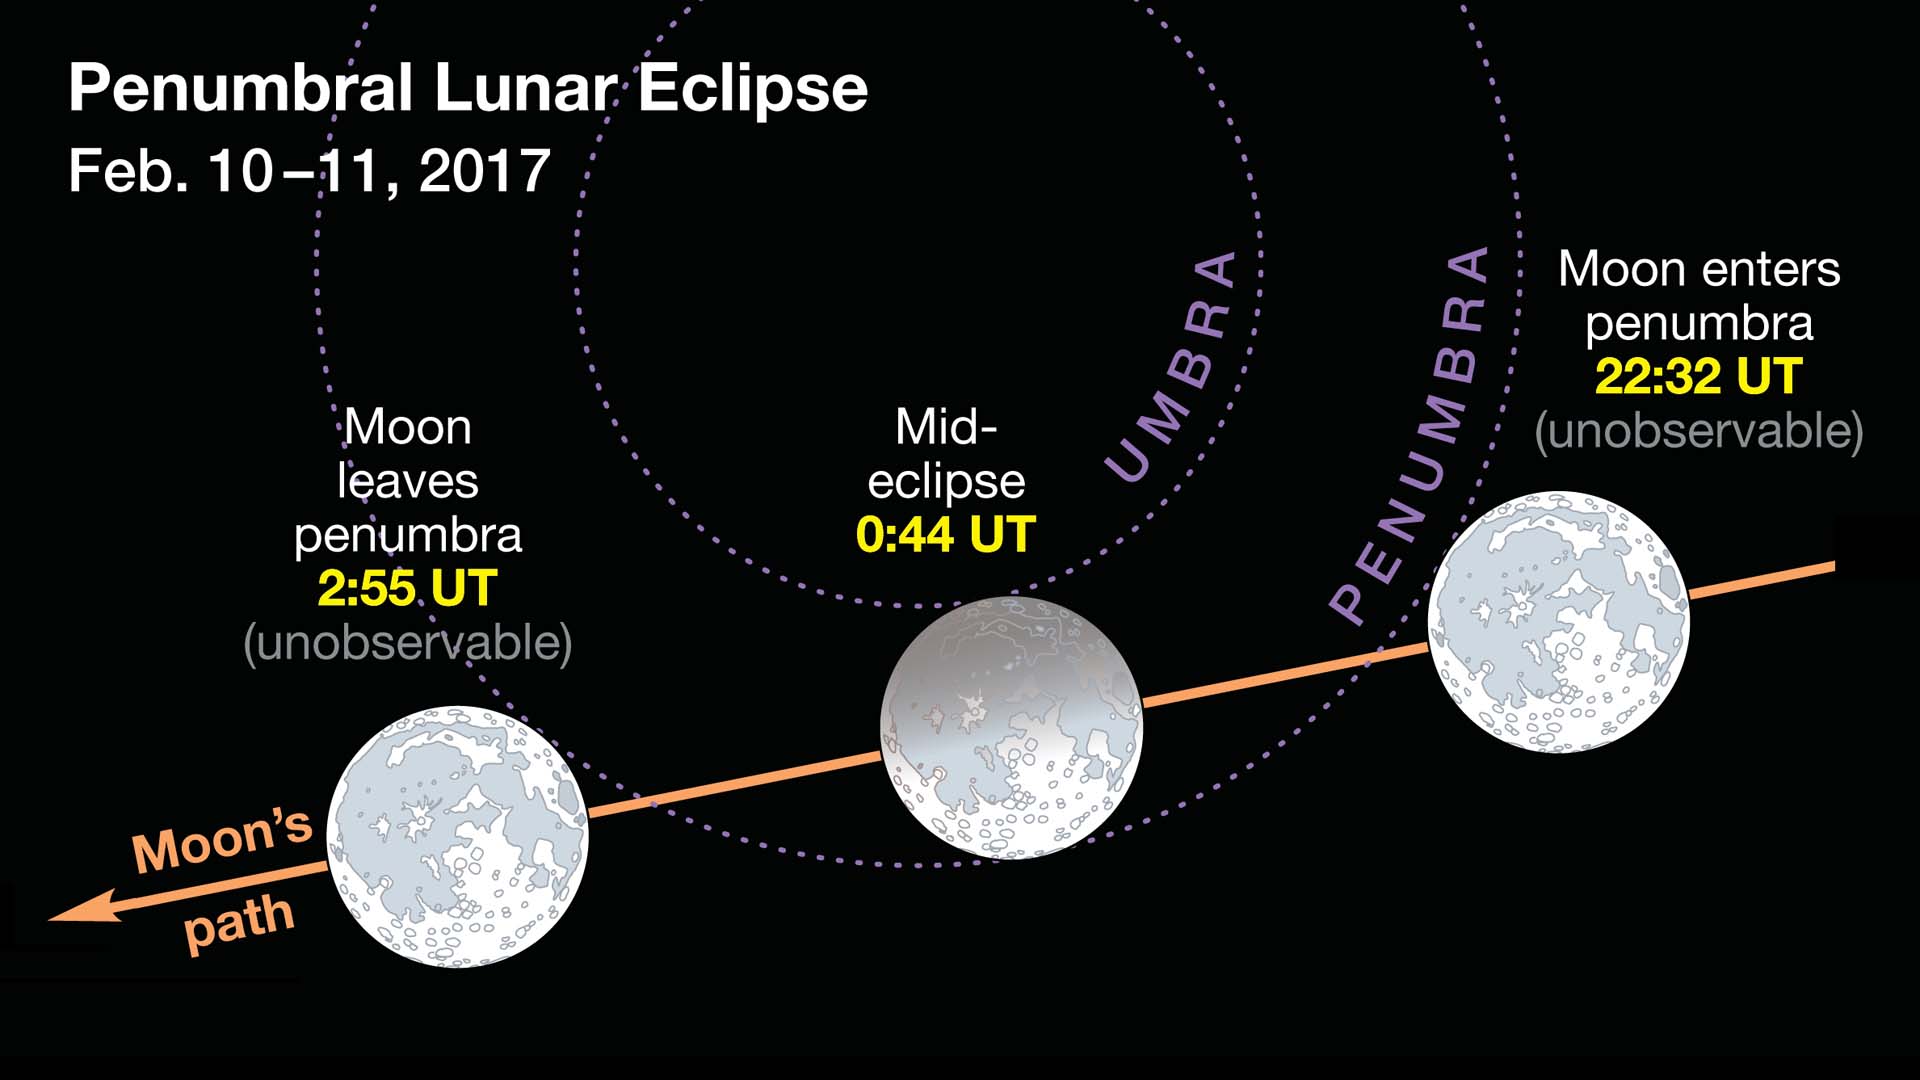 Lunar eclipse, comet, full moon all coming on February 10, 2017